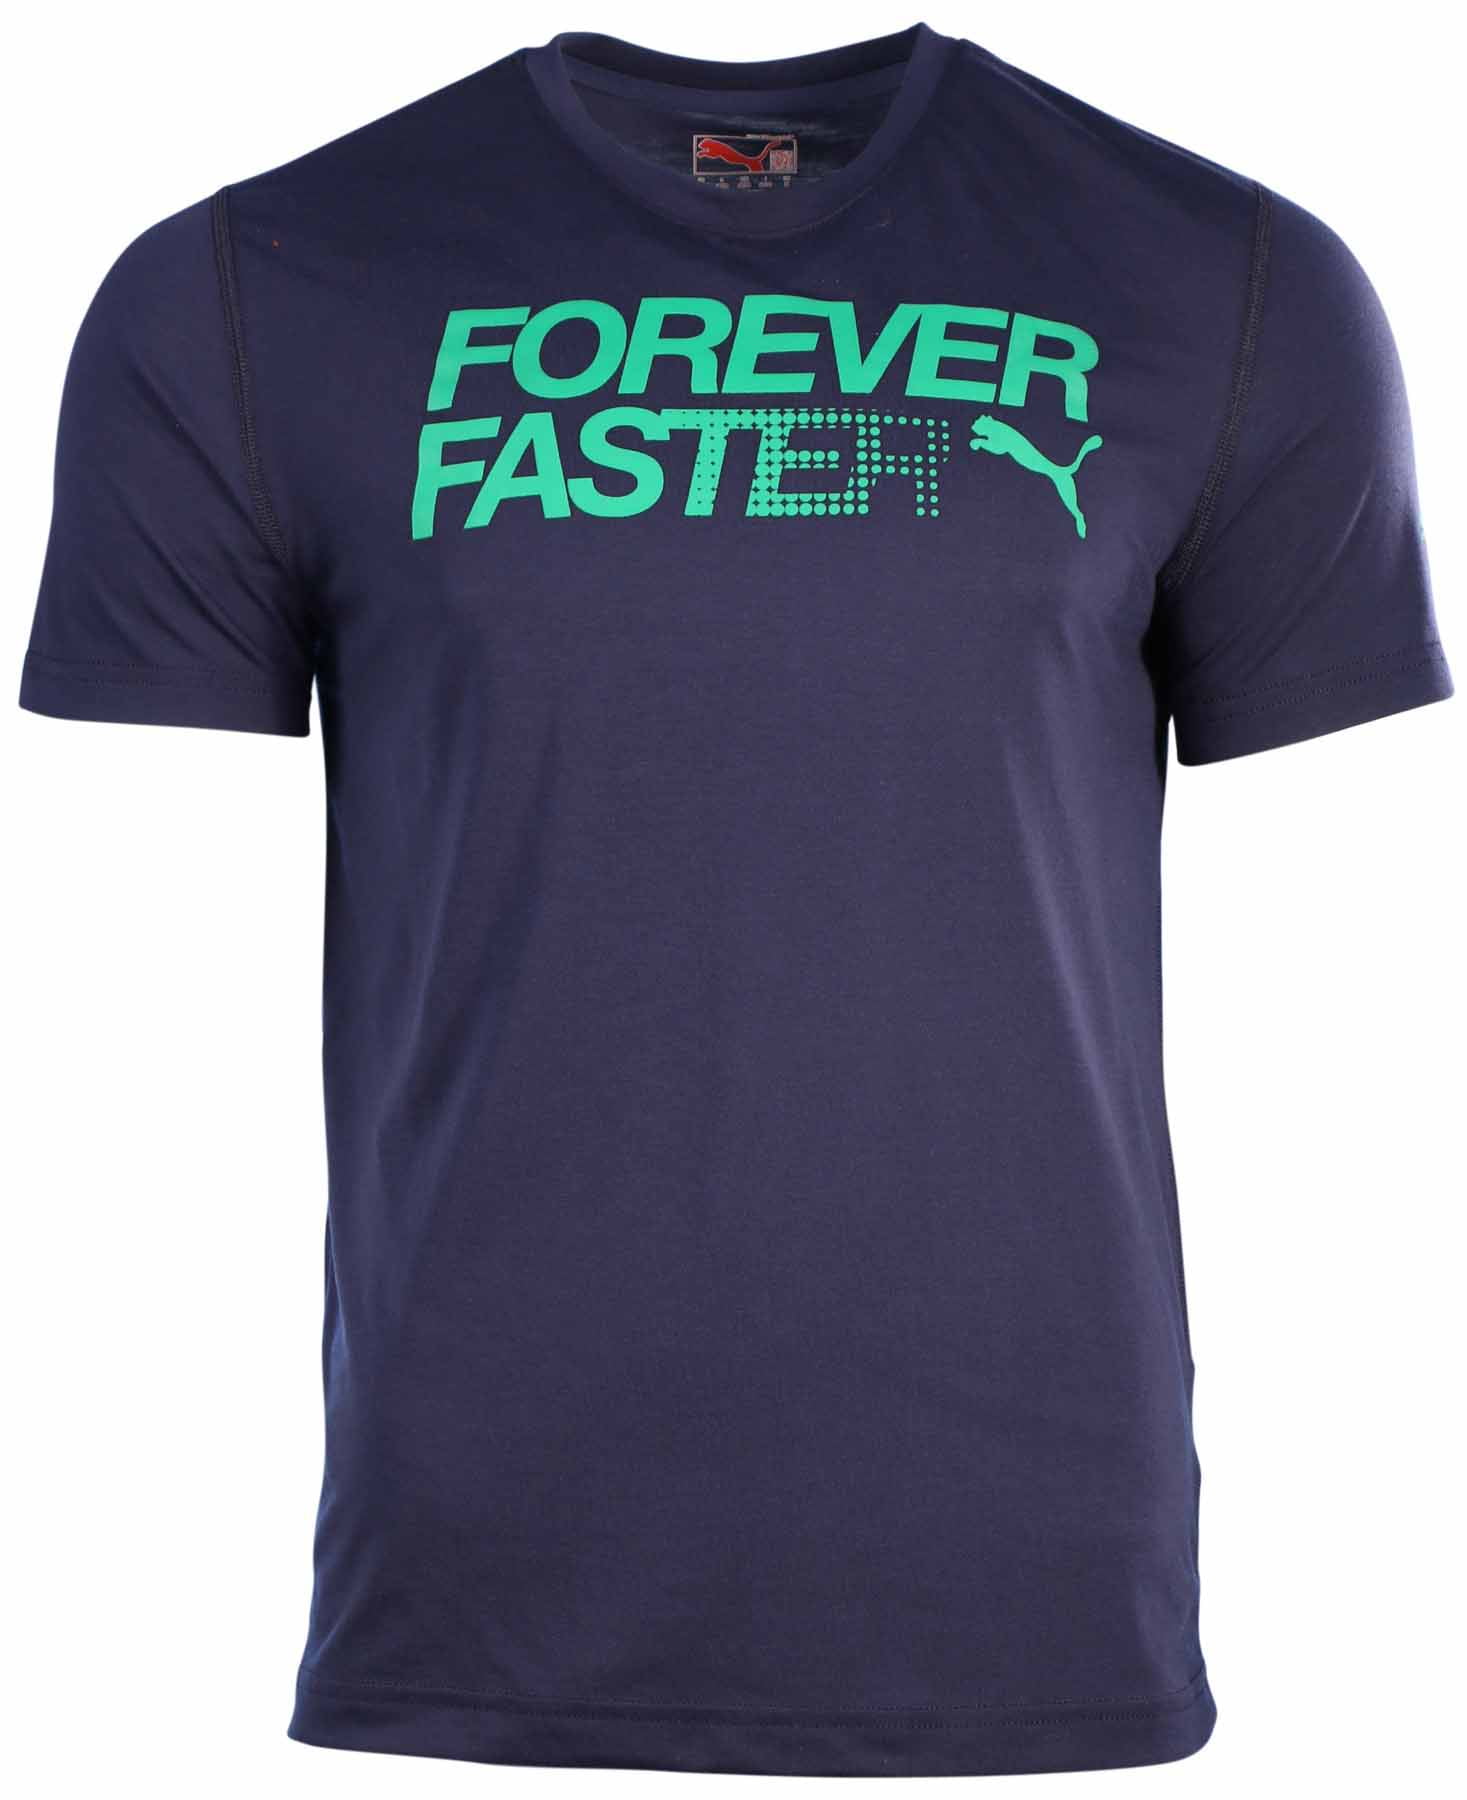 Forever Faster Graphic T-Shirt 